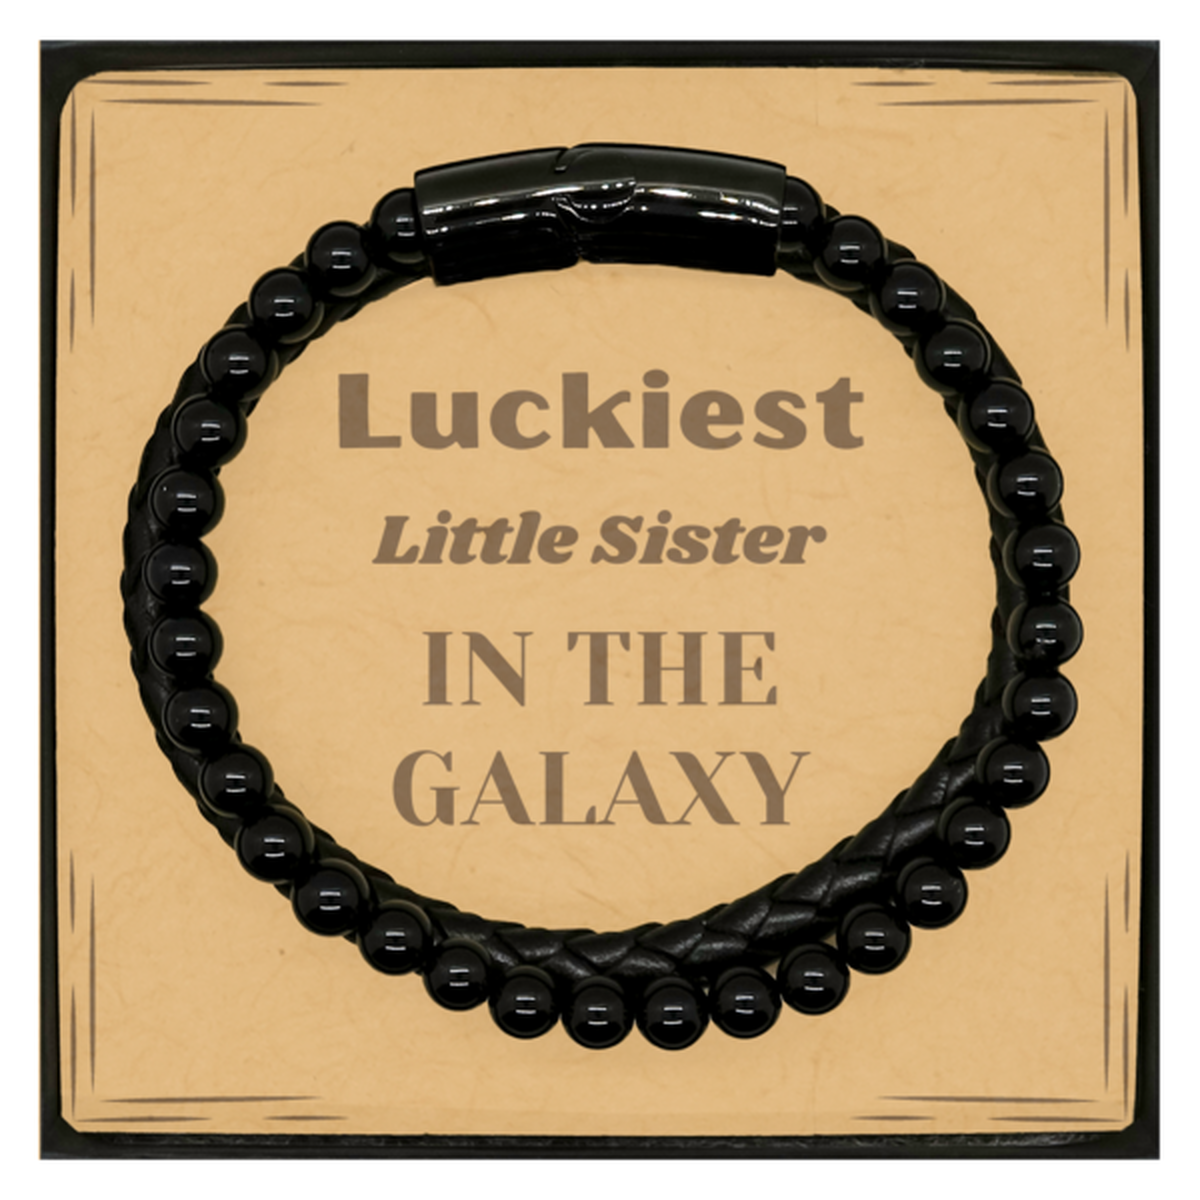 Luckiest Little Sister in the Galaxy, To My Little Sister Message Card Gifts, Christmas Little Sister Stone Leather Bracelets Gifts, X-mas Birthday Unique Gifts For Little Sister Men Women